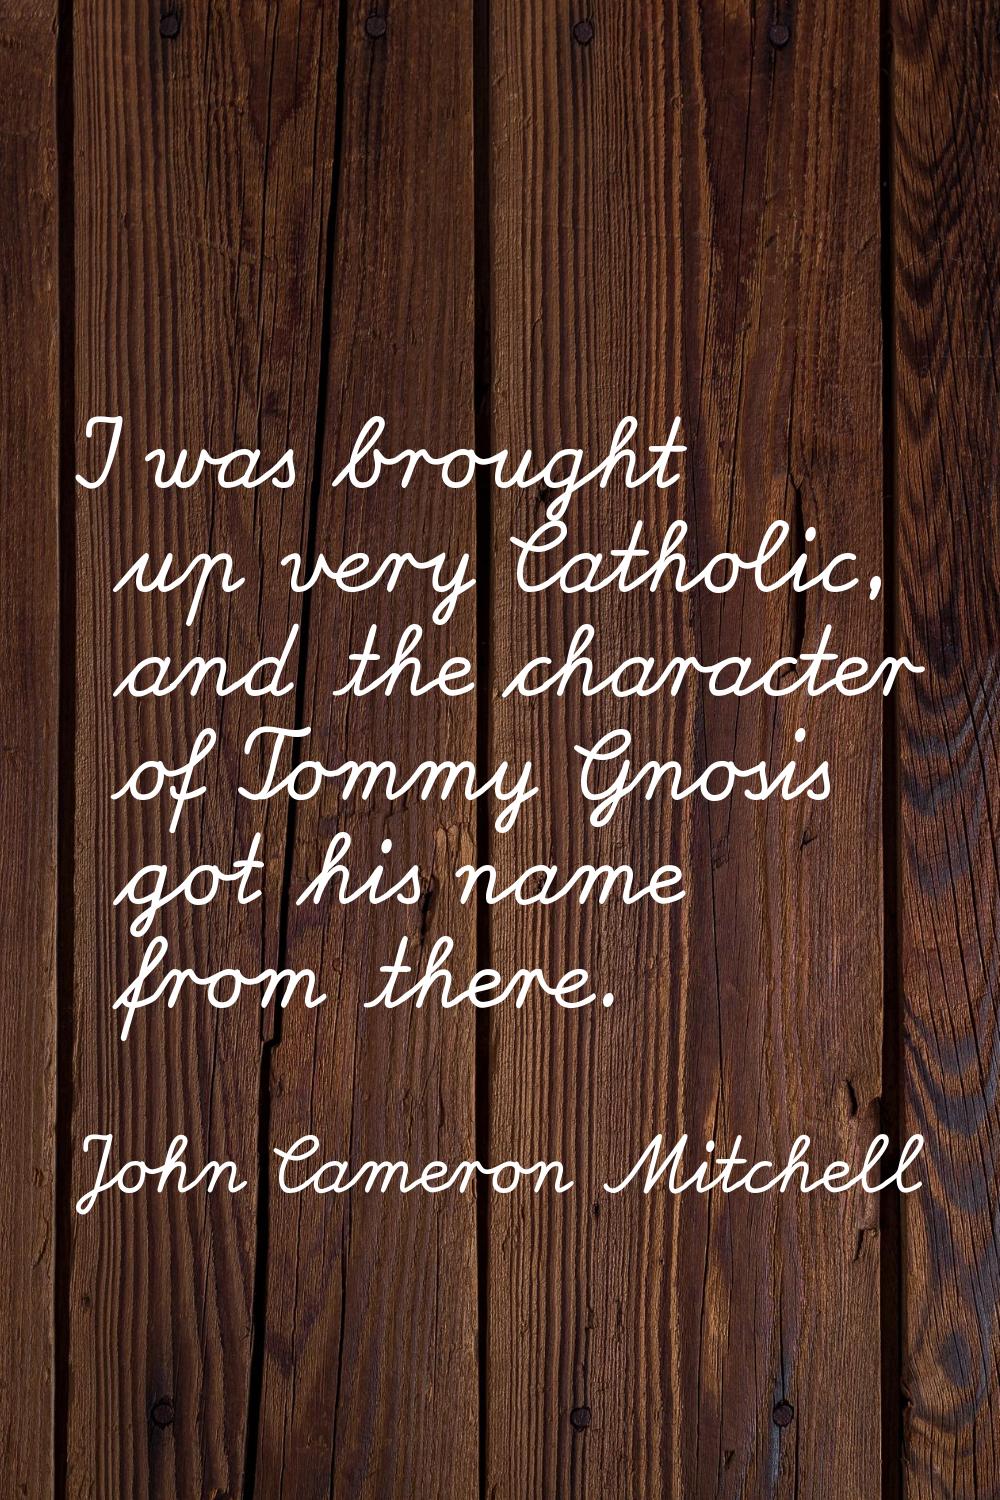 I was brought up very Catholic, and the character of Tommy Gnosis got his name from there.